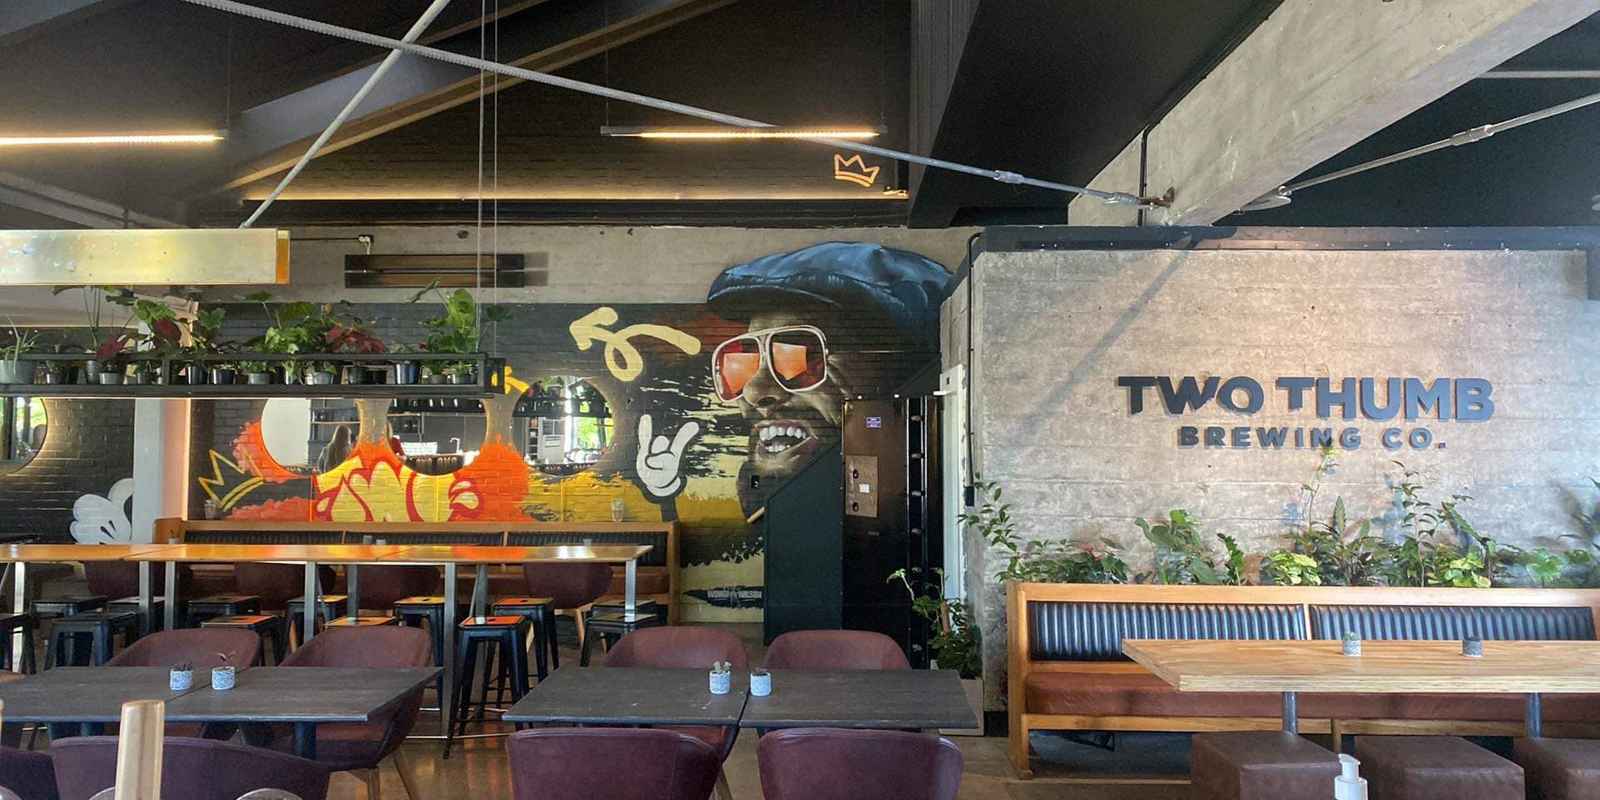 Two Thumb Brewing Co. on Colombo